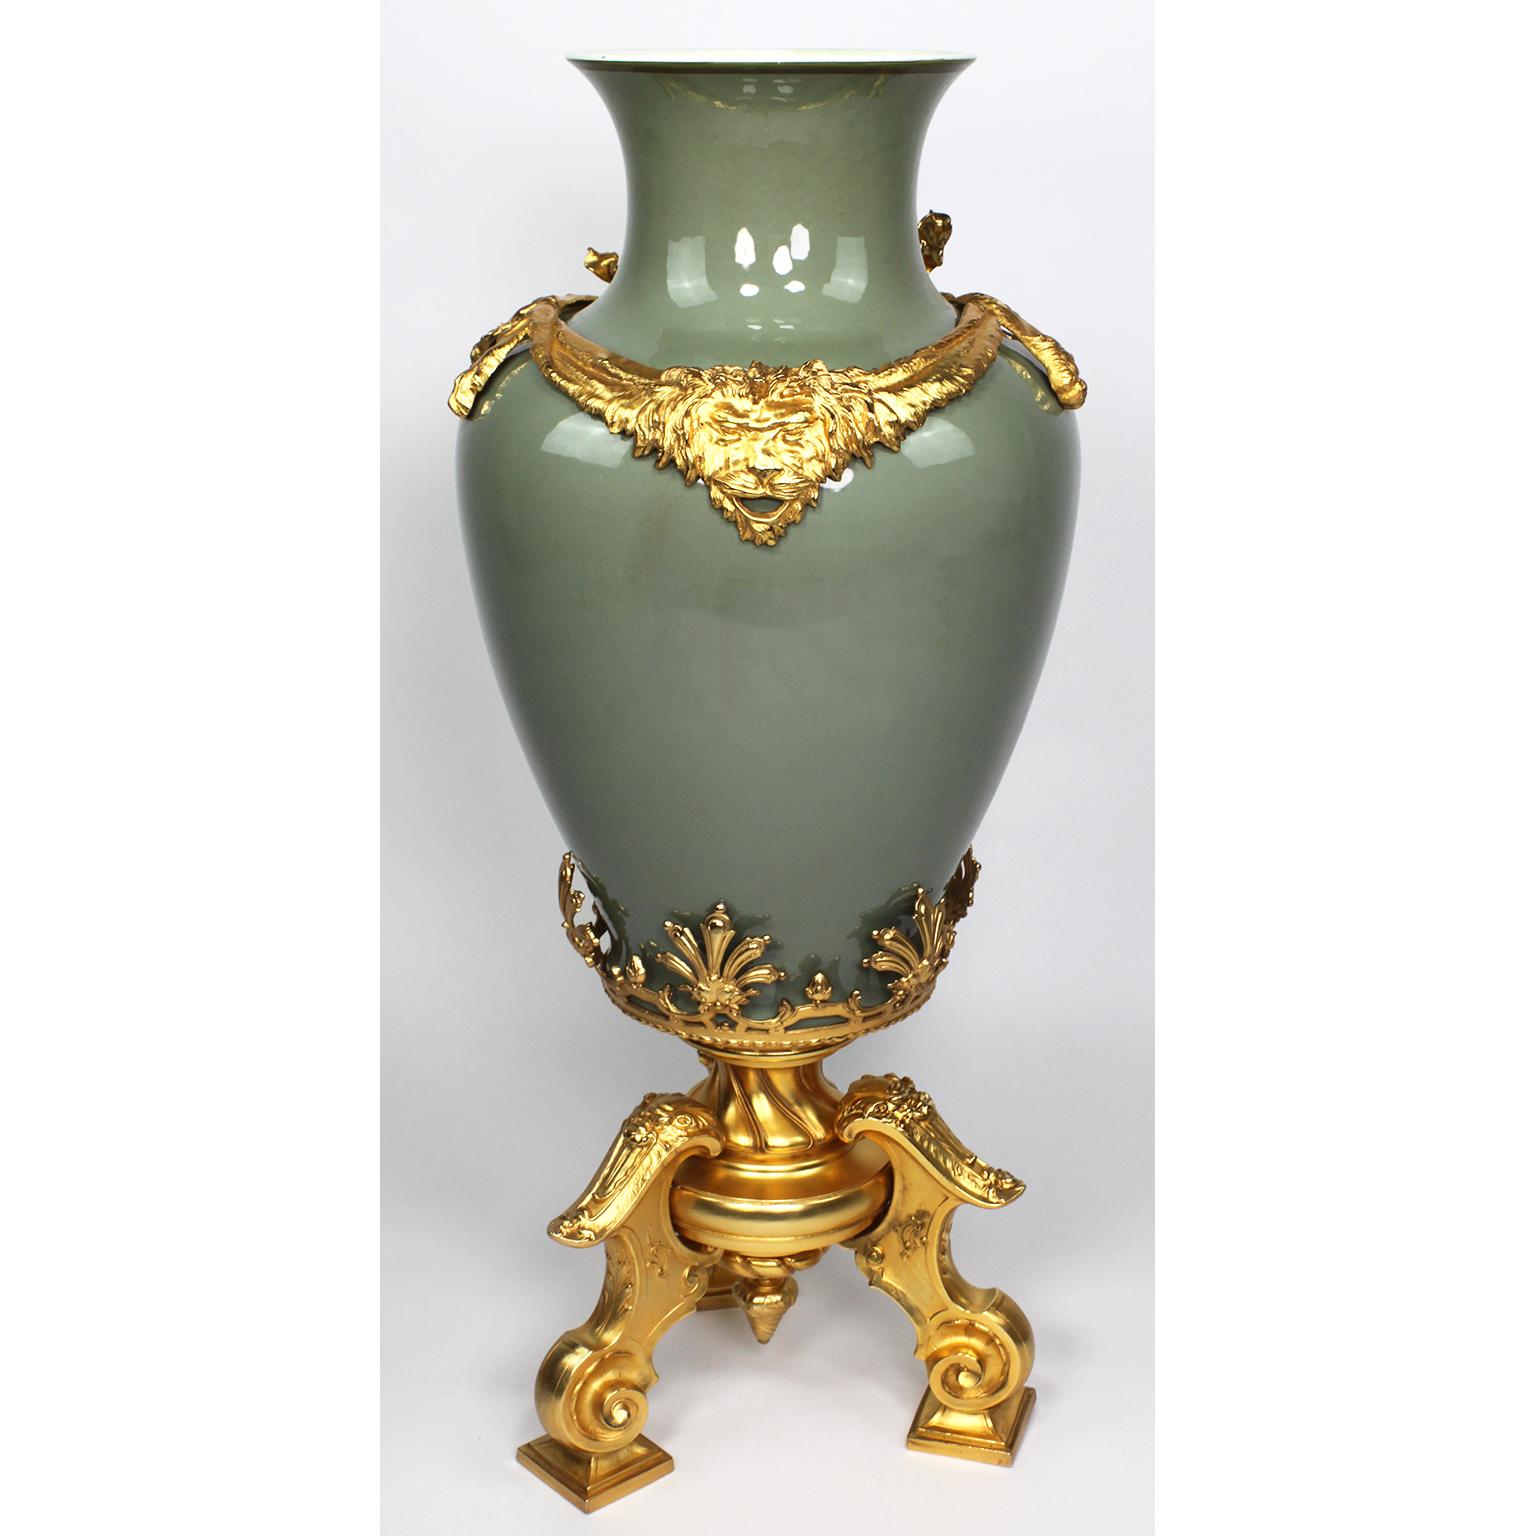 European Continental 19th-20th Century Porcelain and Gilt Metal Mounted Vase with Cherubs